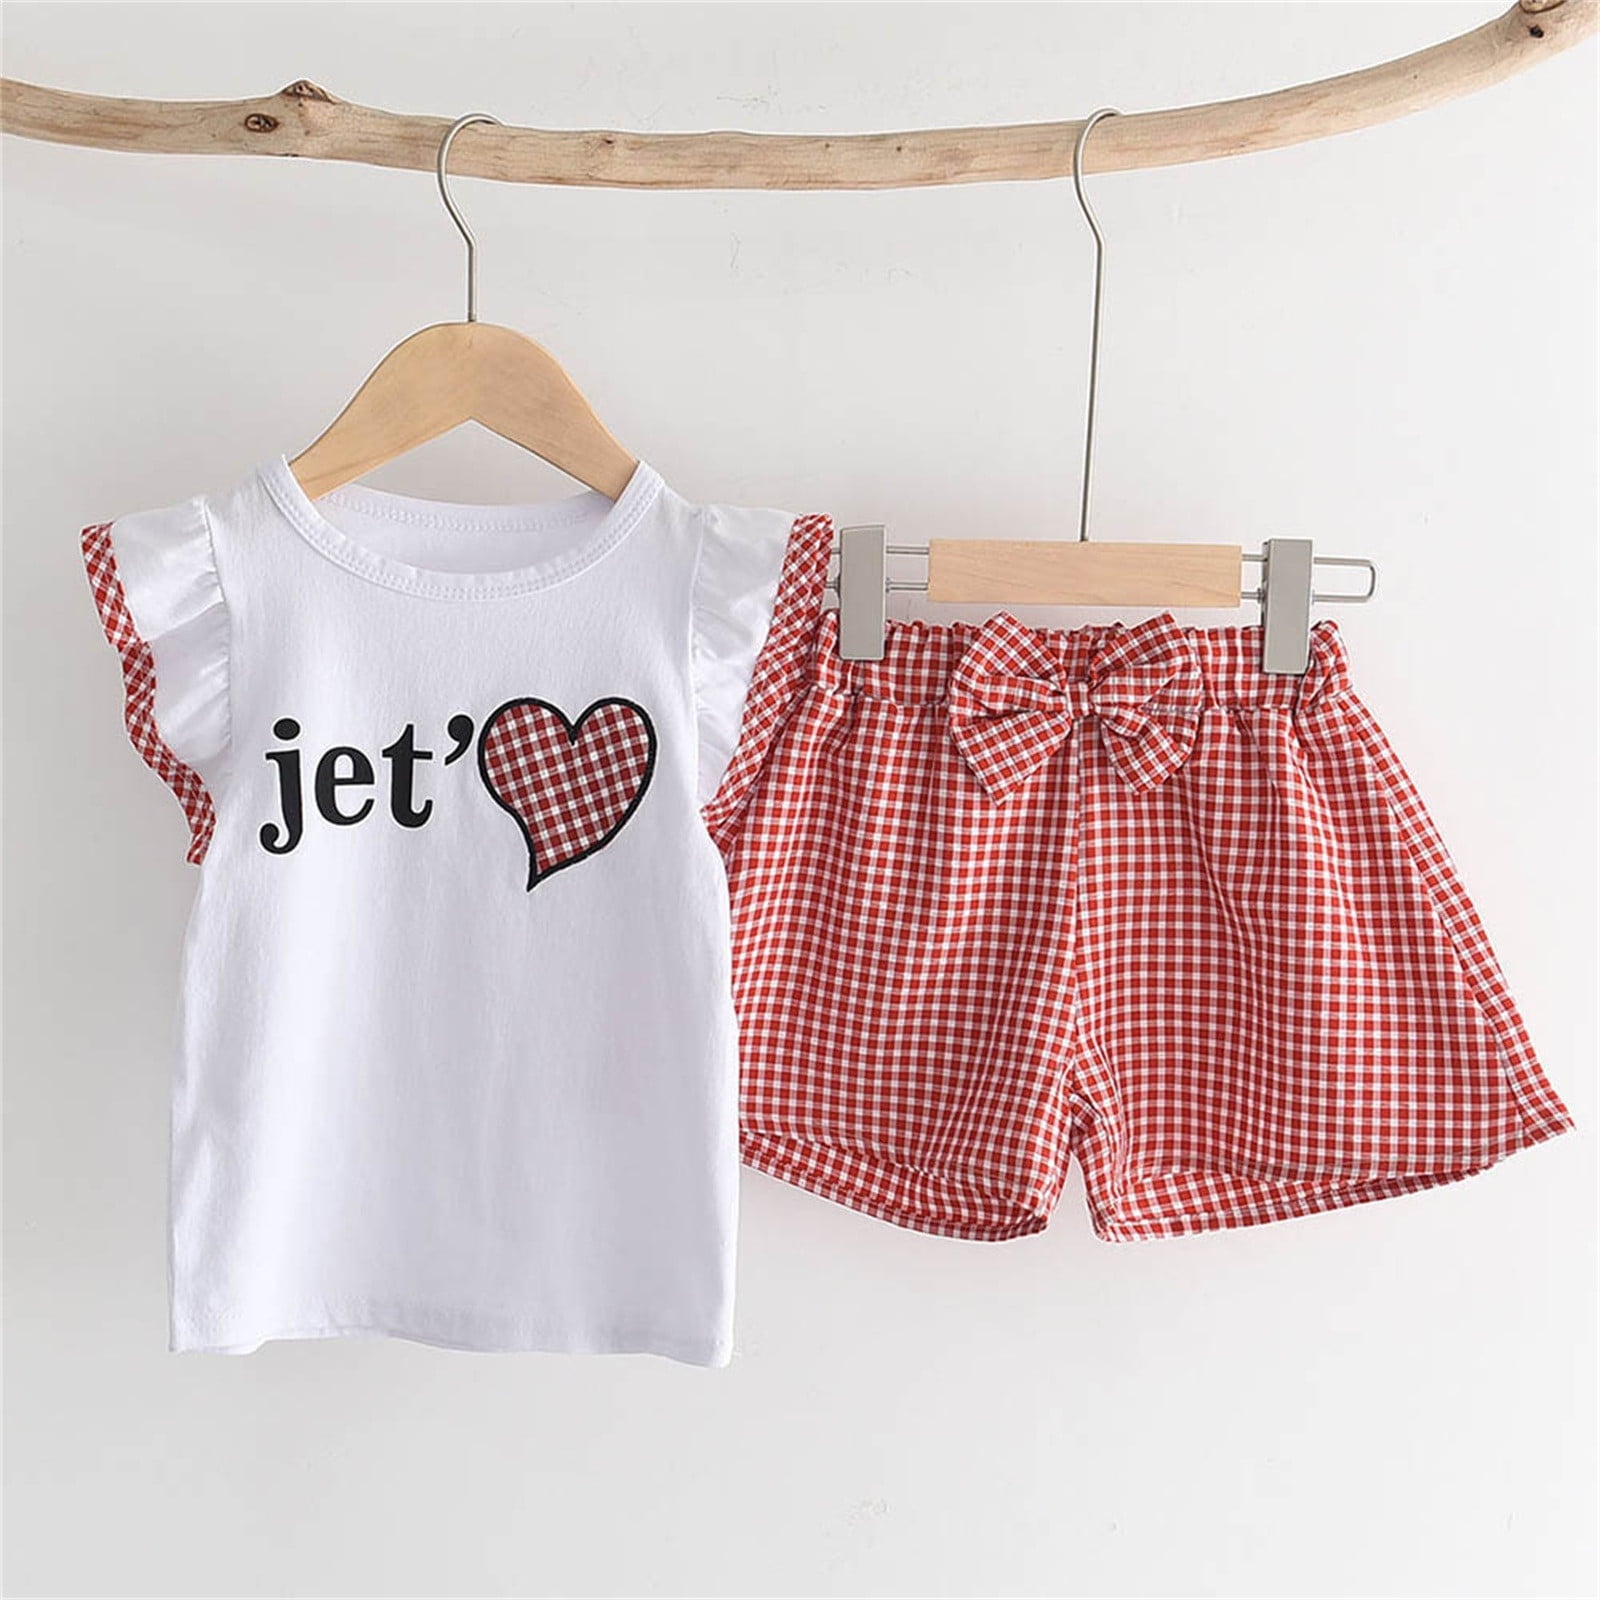 dmqupv Girl Outfits Size 6x Toddler Kids Baby Girls Ruffle Short Sleeve  Letter T Shirt Anime Clothes Outfits Ideas 